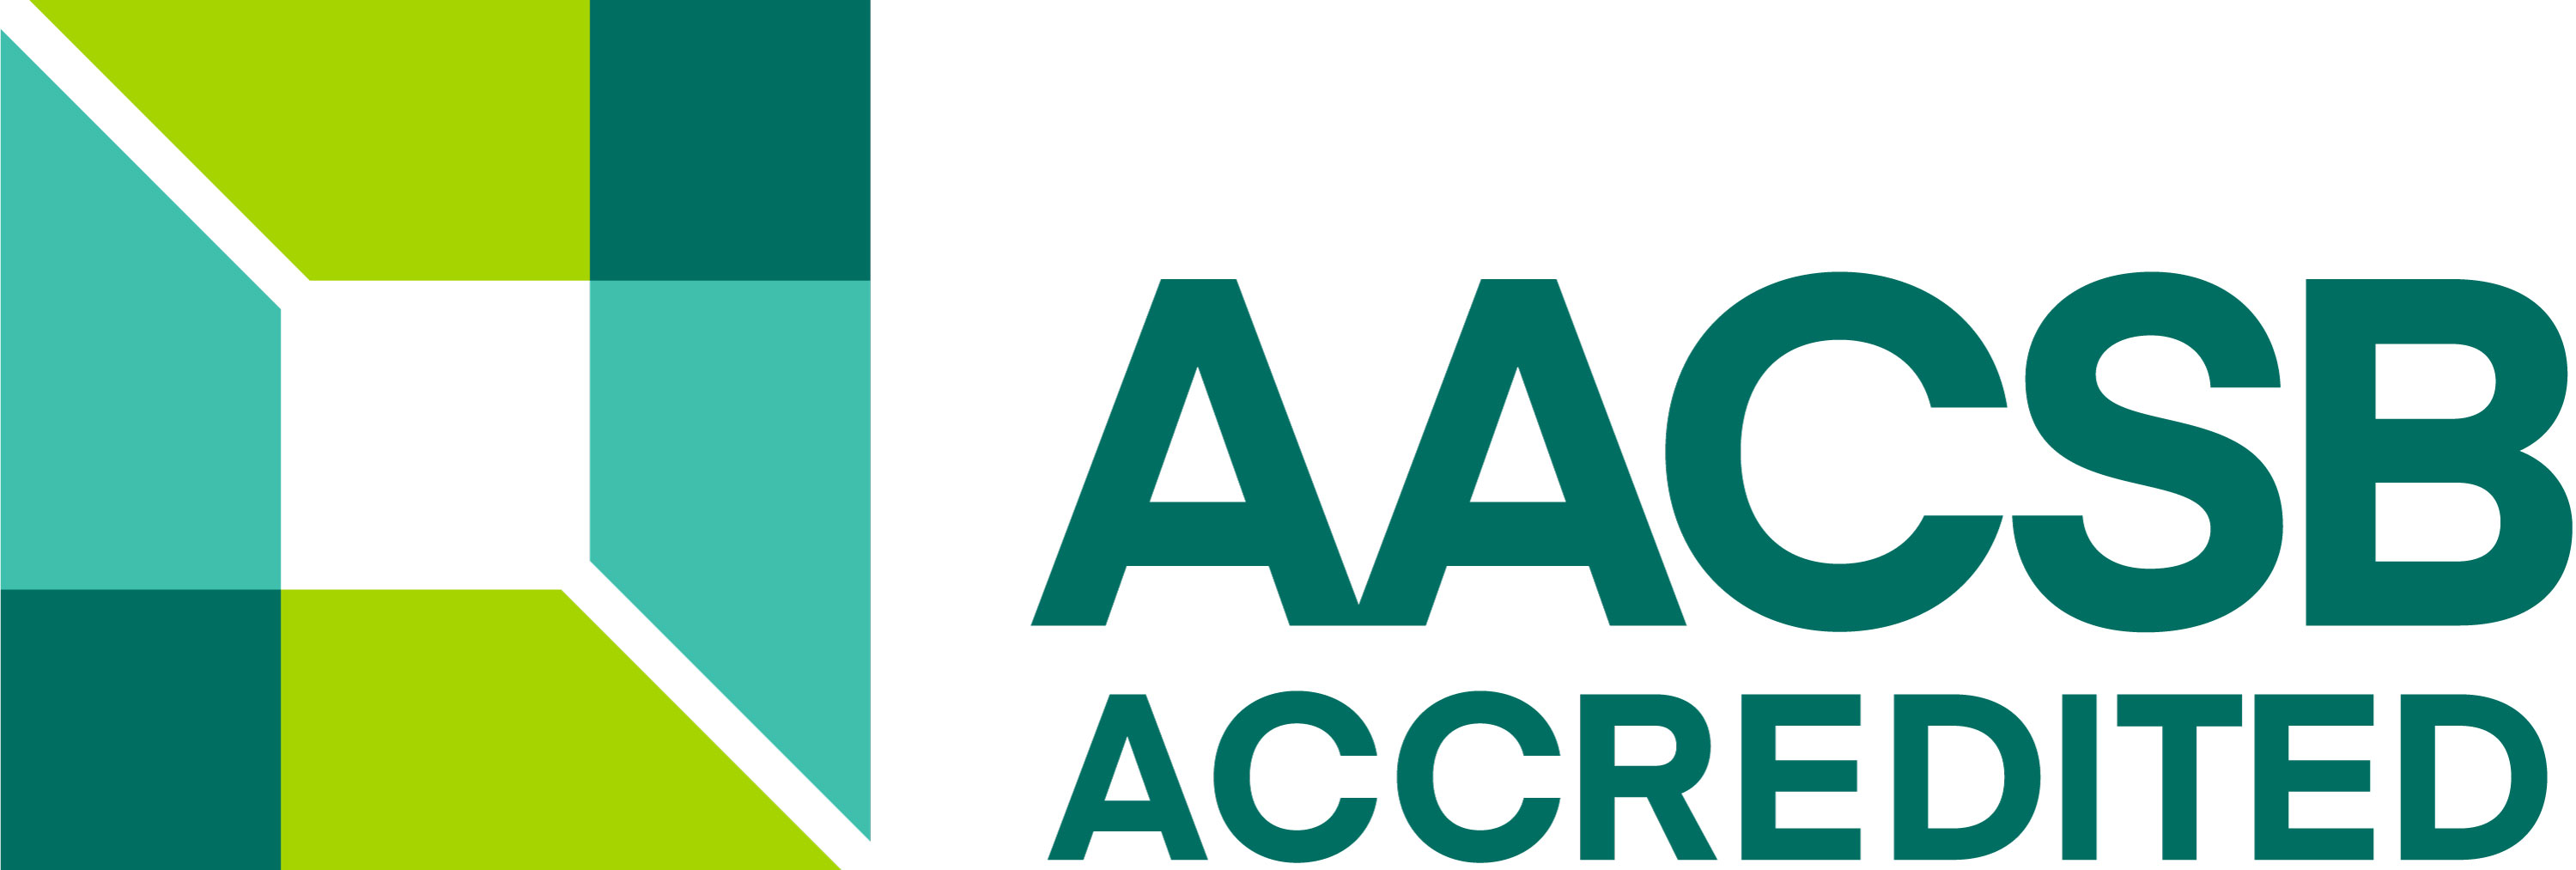 Logo for AACSB, the accrediting body for this degree program. 